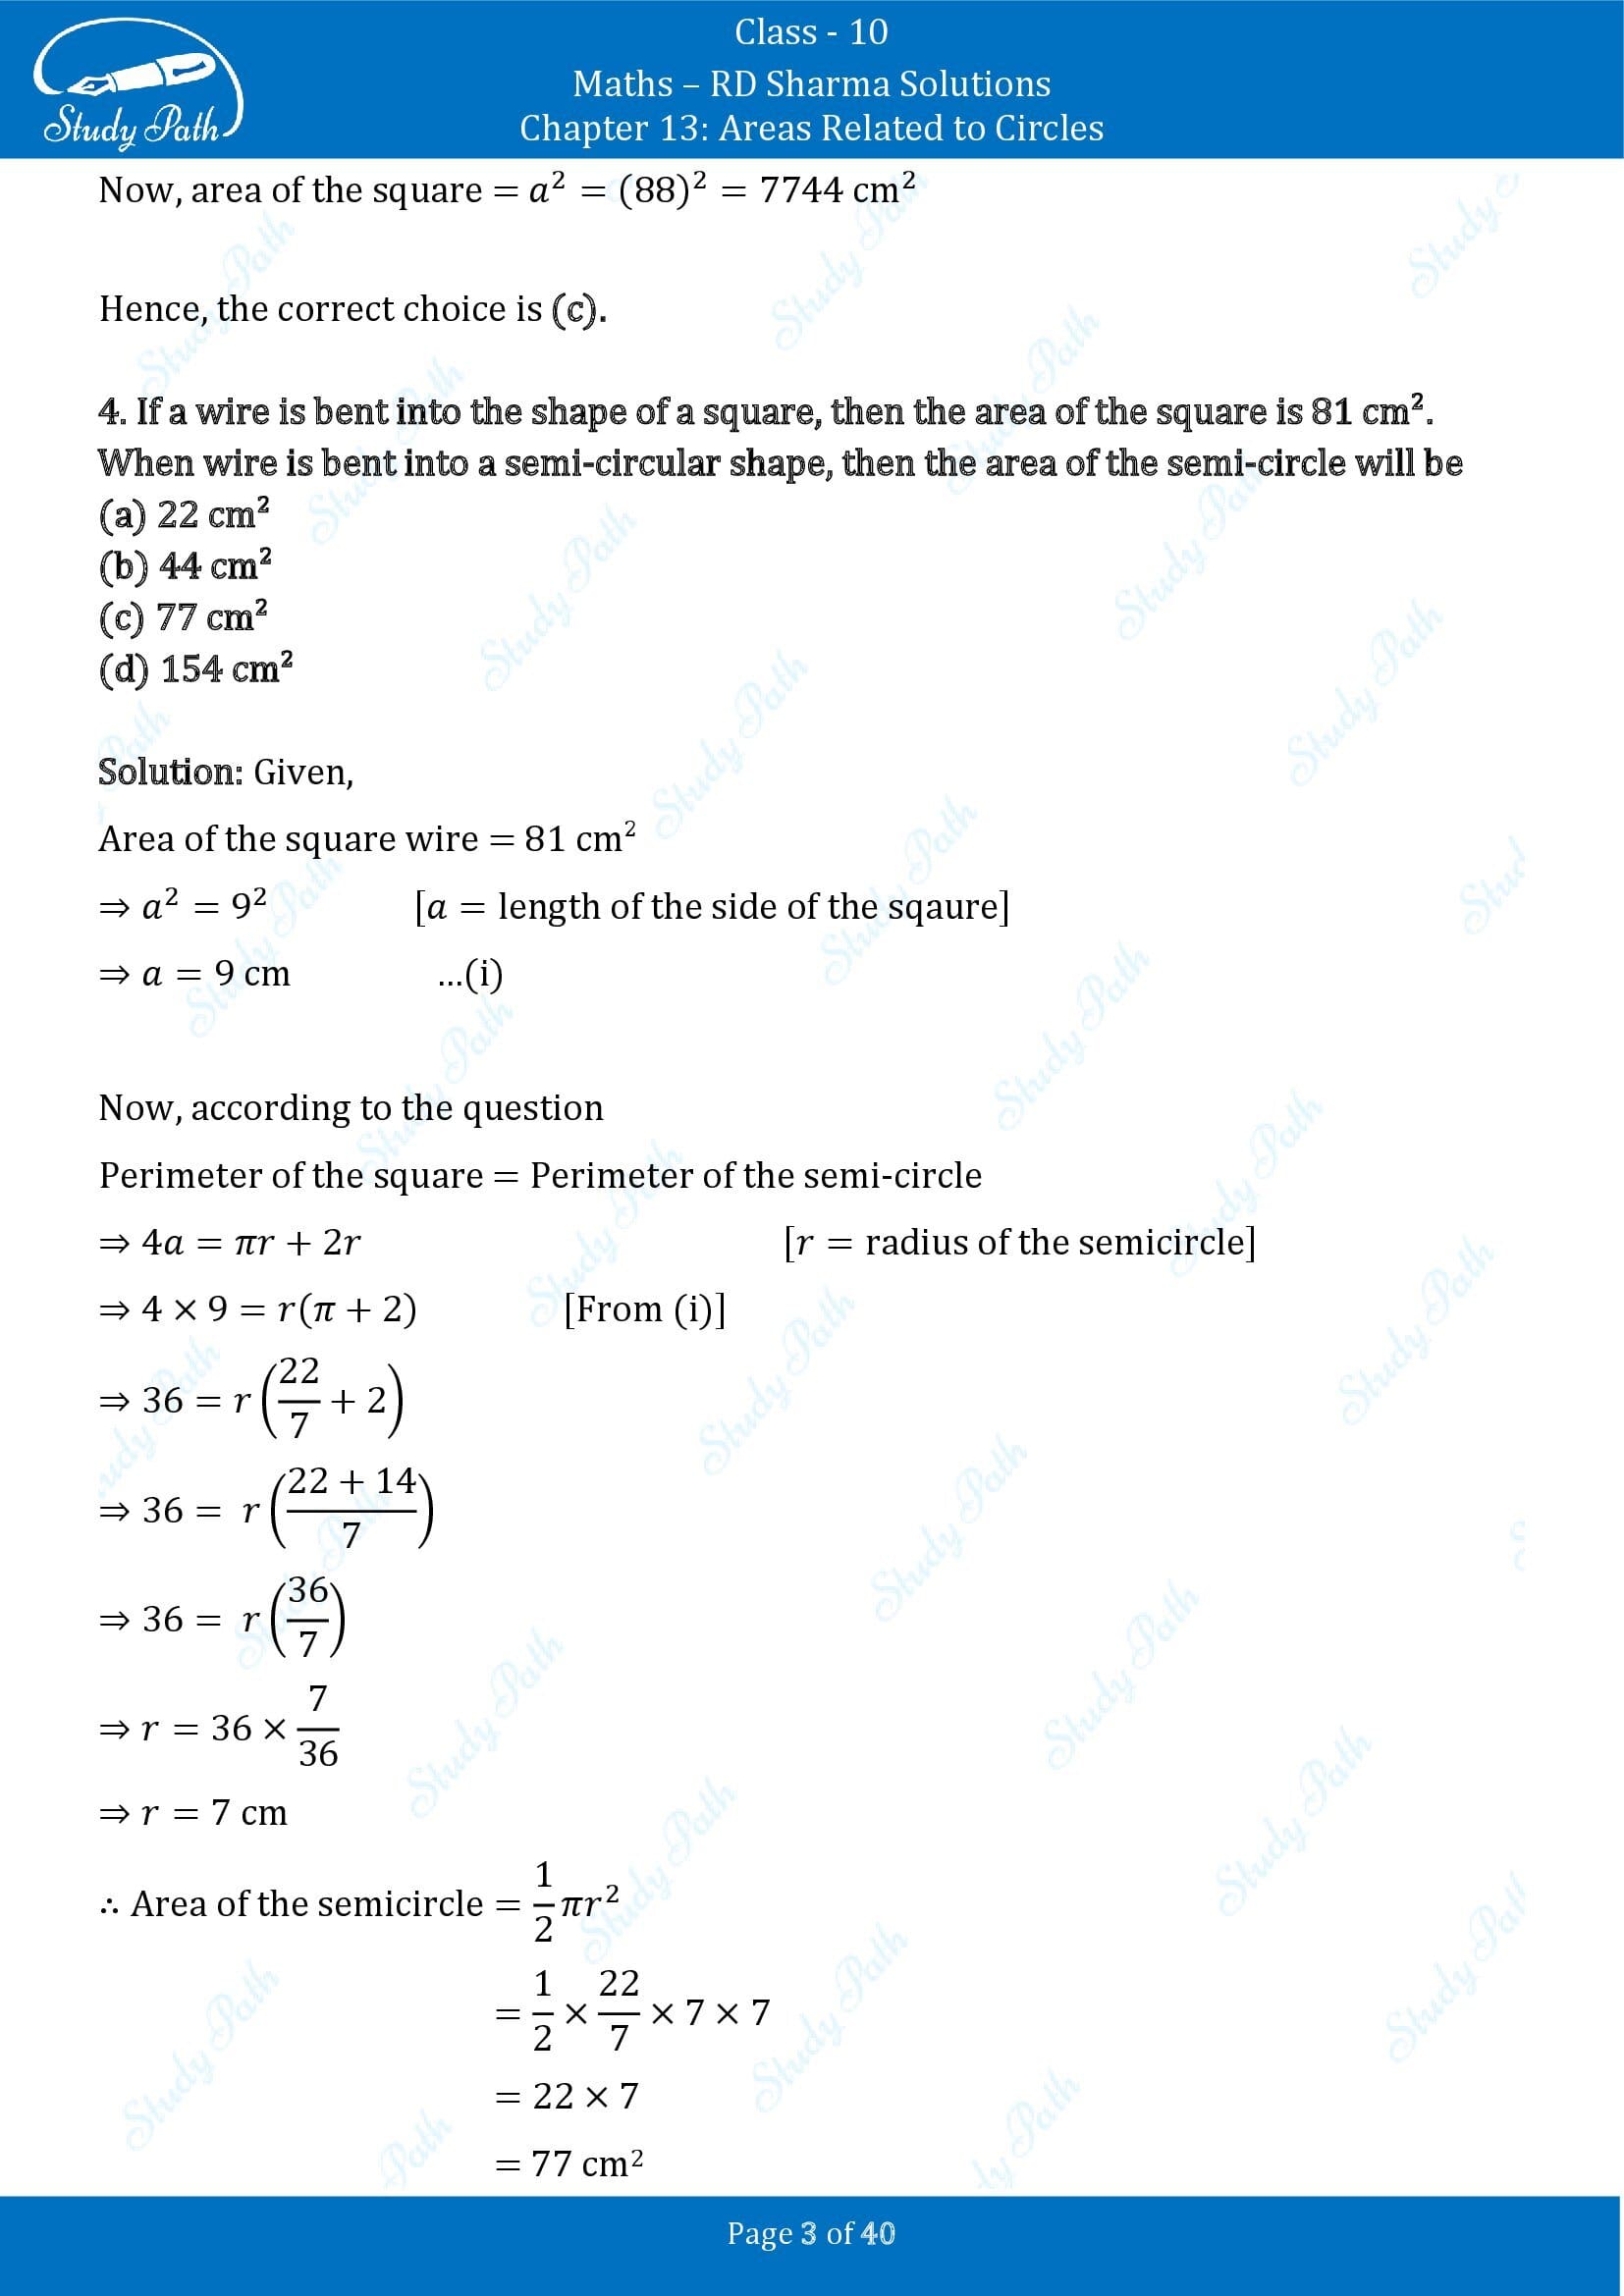 RD Sharma Solutions Class 10 Chapter 13 Areas Related to Circles Multiple Choice Question MCQs 00003